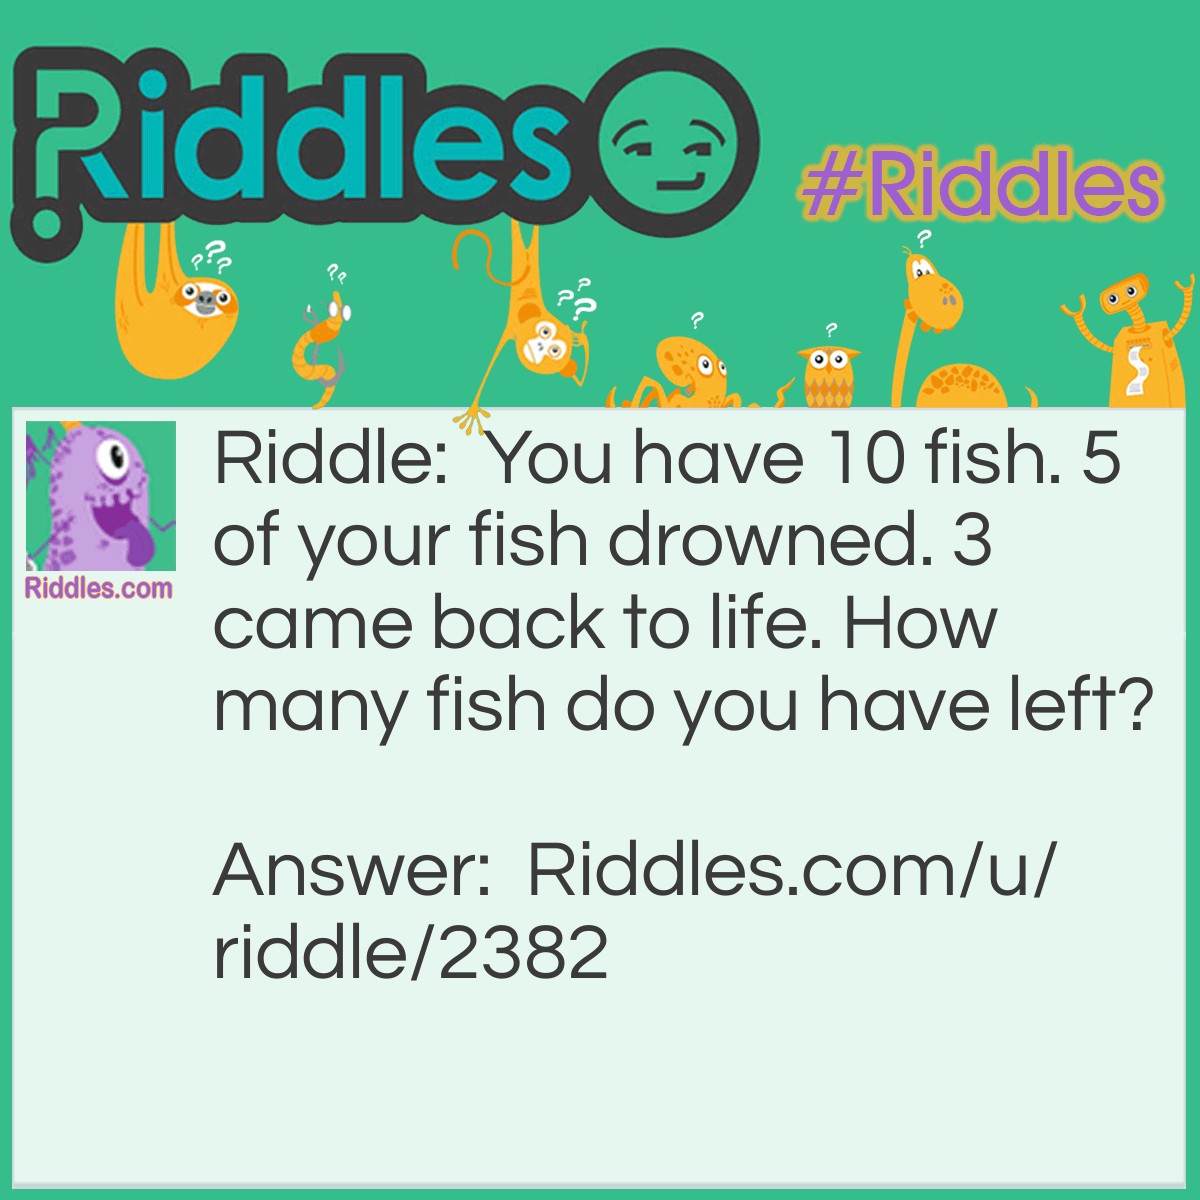 Riddle: You have 10 fish. 5 of your fish drowned. 3 came back to life. How many fish do you have left? Answer: Fish can't drown. (LOL I know, still <a href="/easy-riddles">easy</a>)